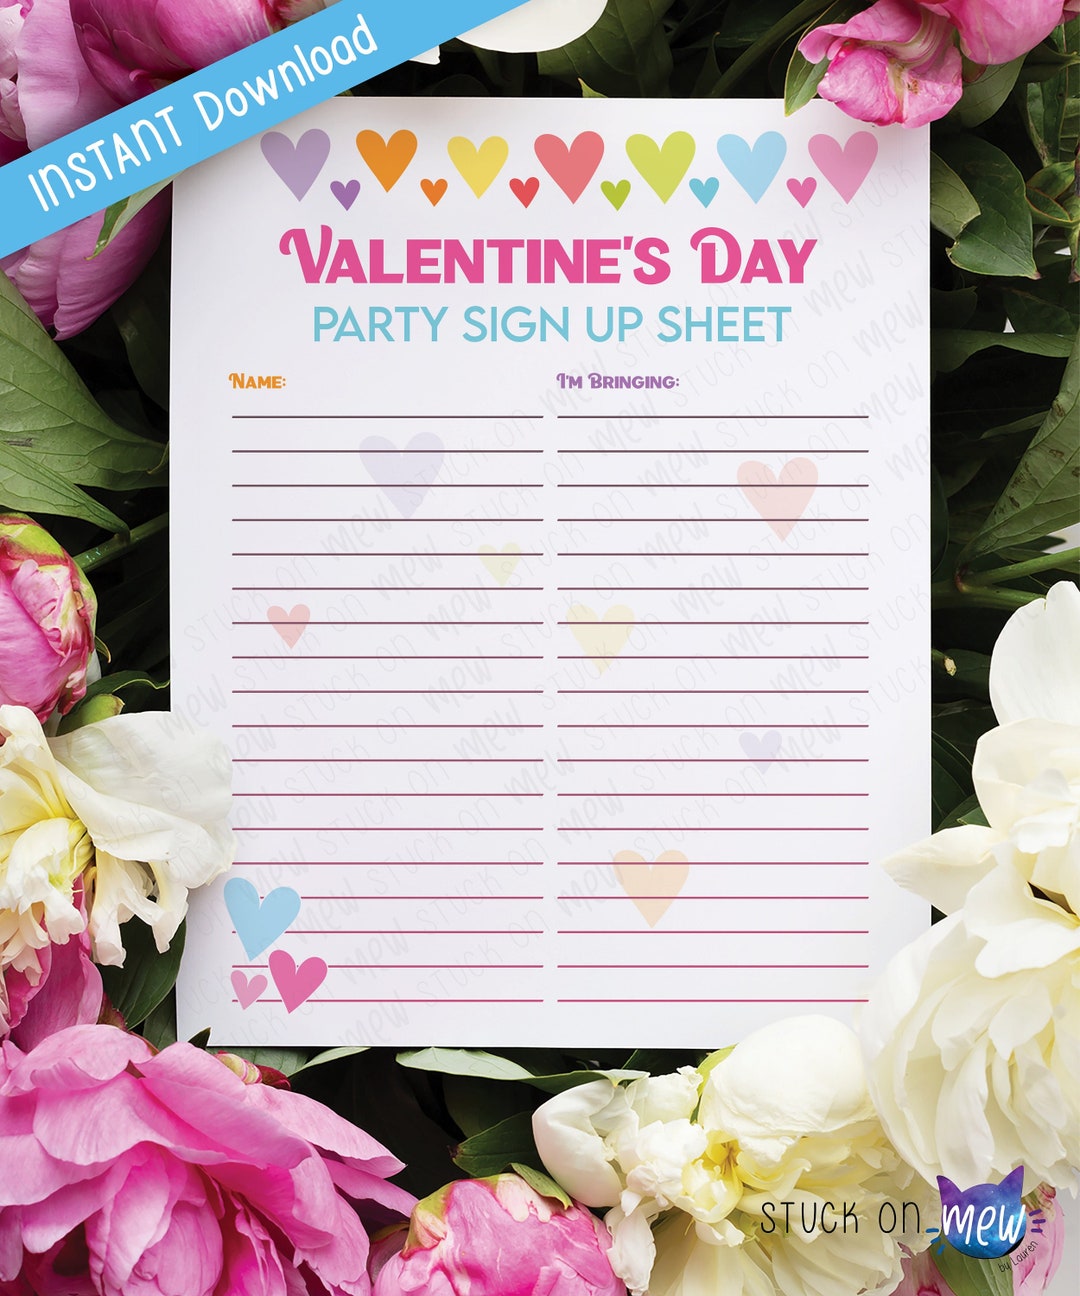 printable-valentine-s-day-party-sign-up-sheet-class-valentine-s-day